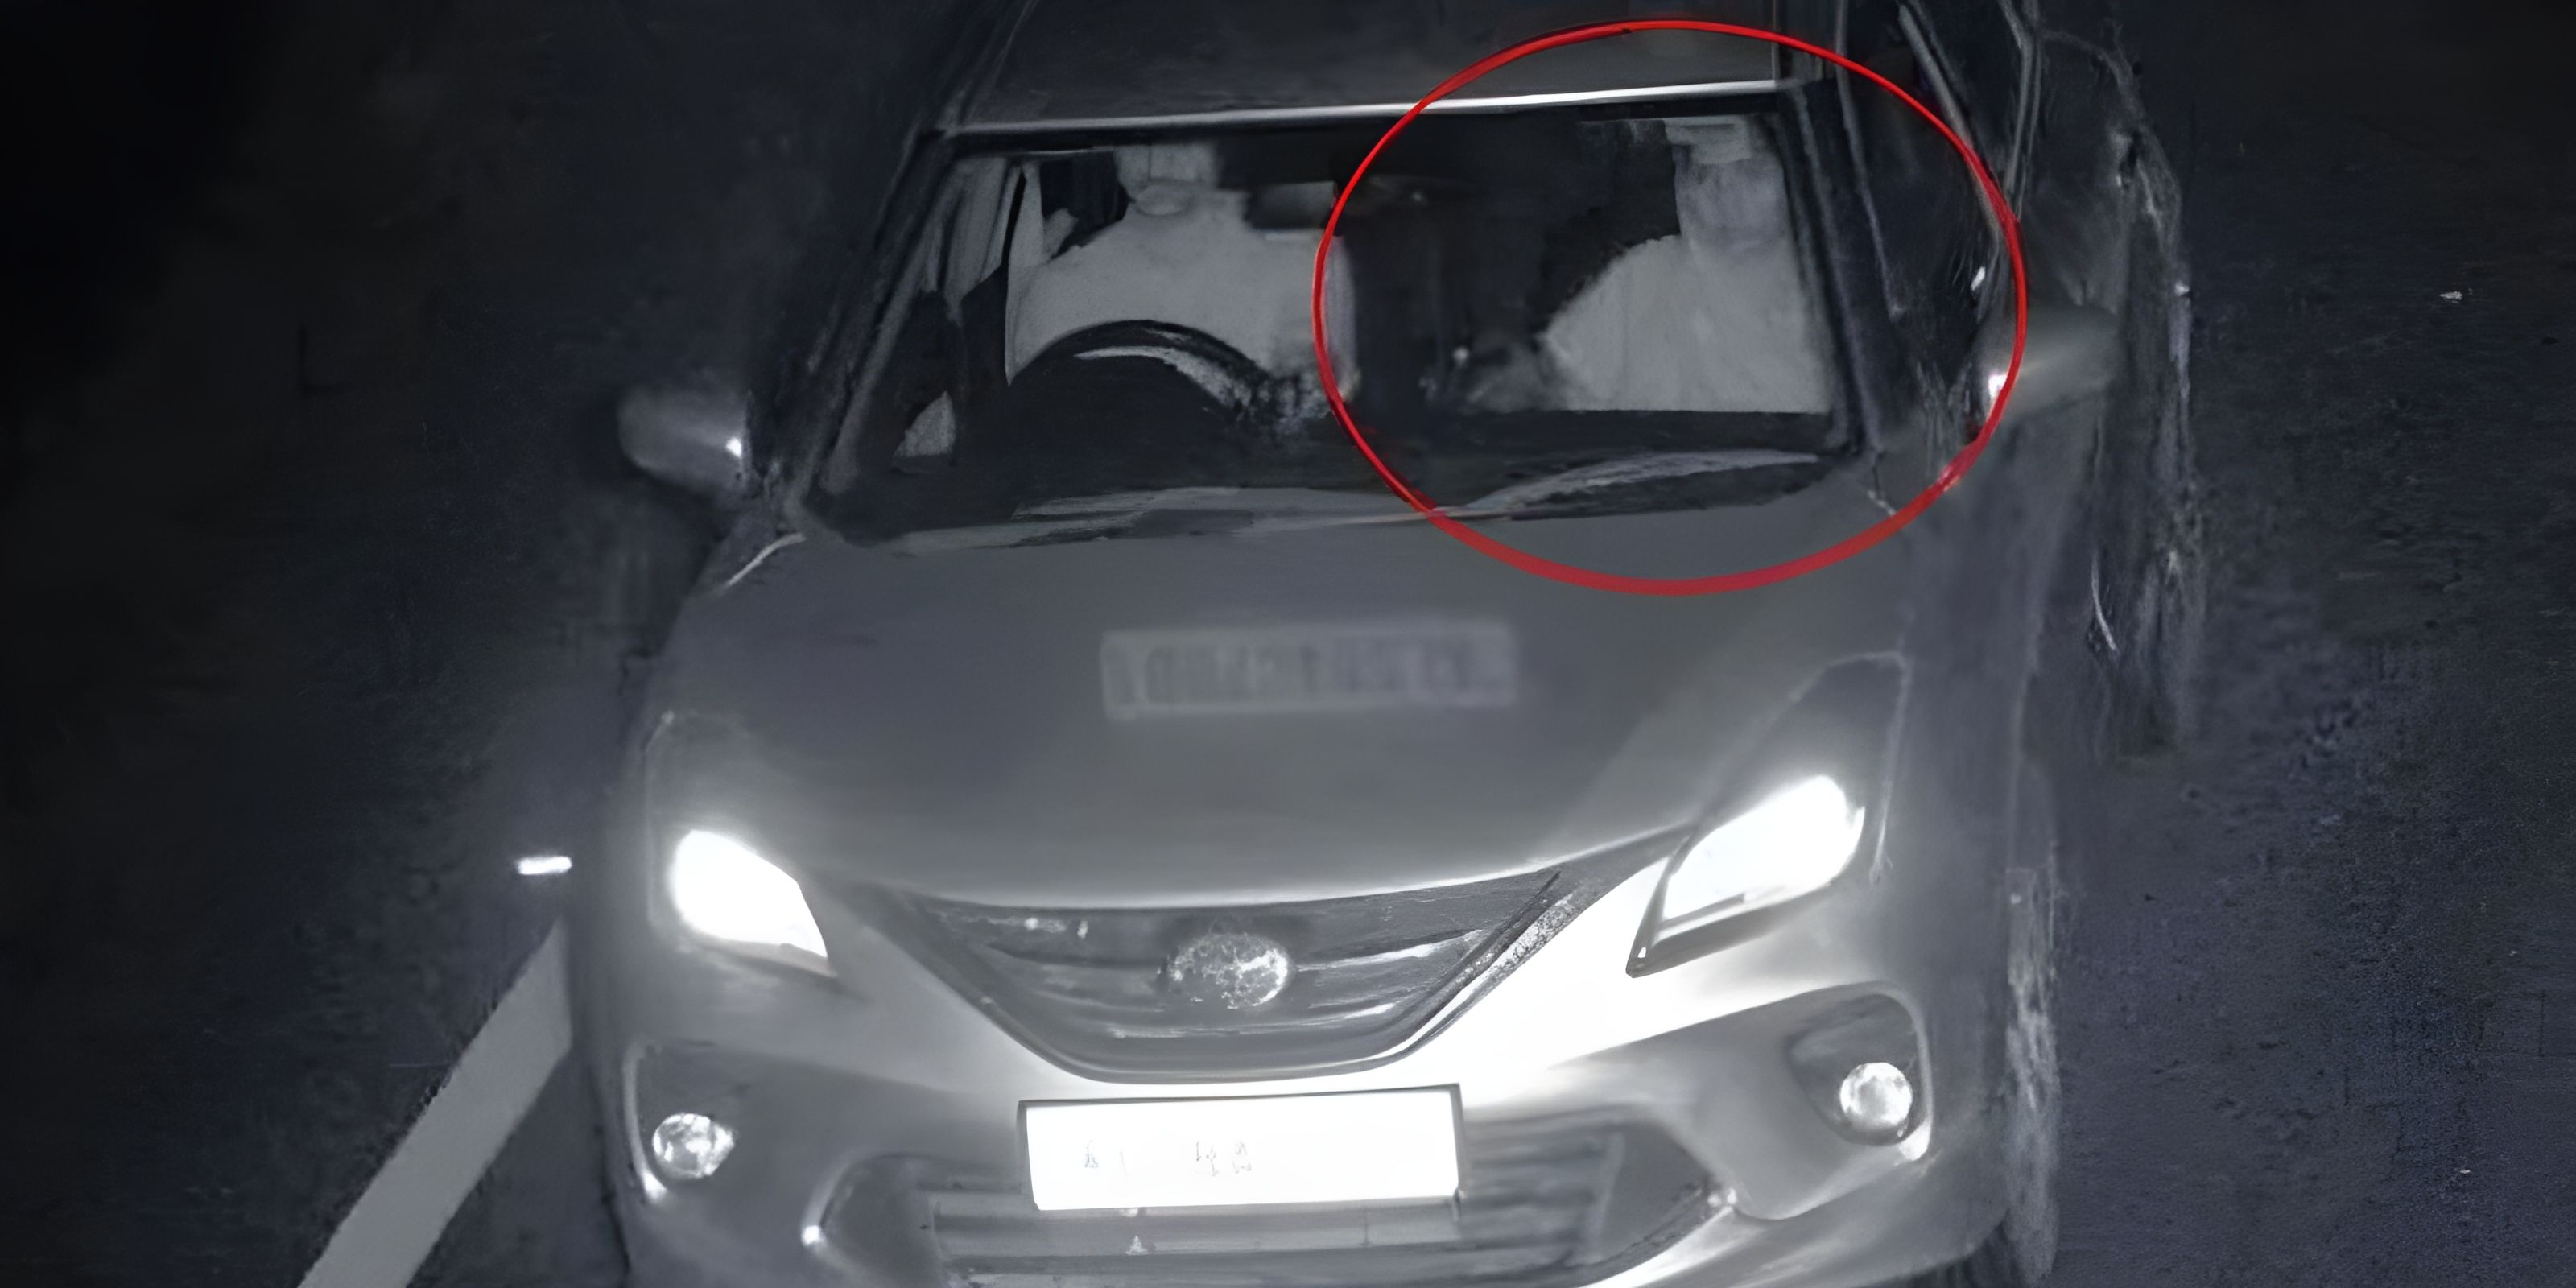 Mystery in Kerala: AI Cameras Capture 'Ghost' Passengers in Vehicles